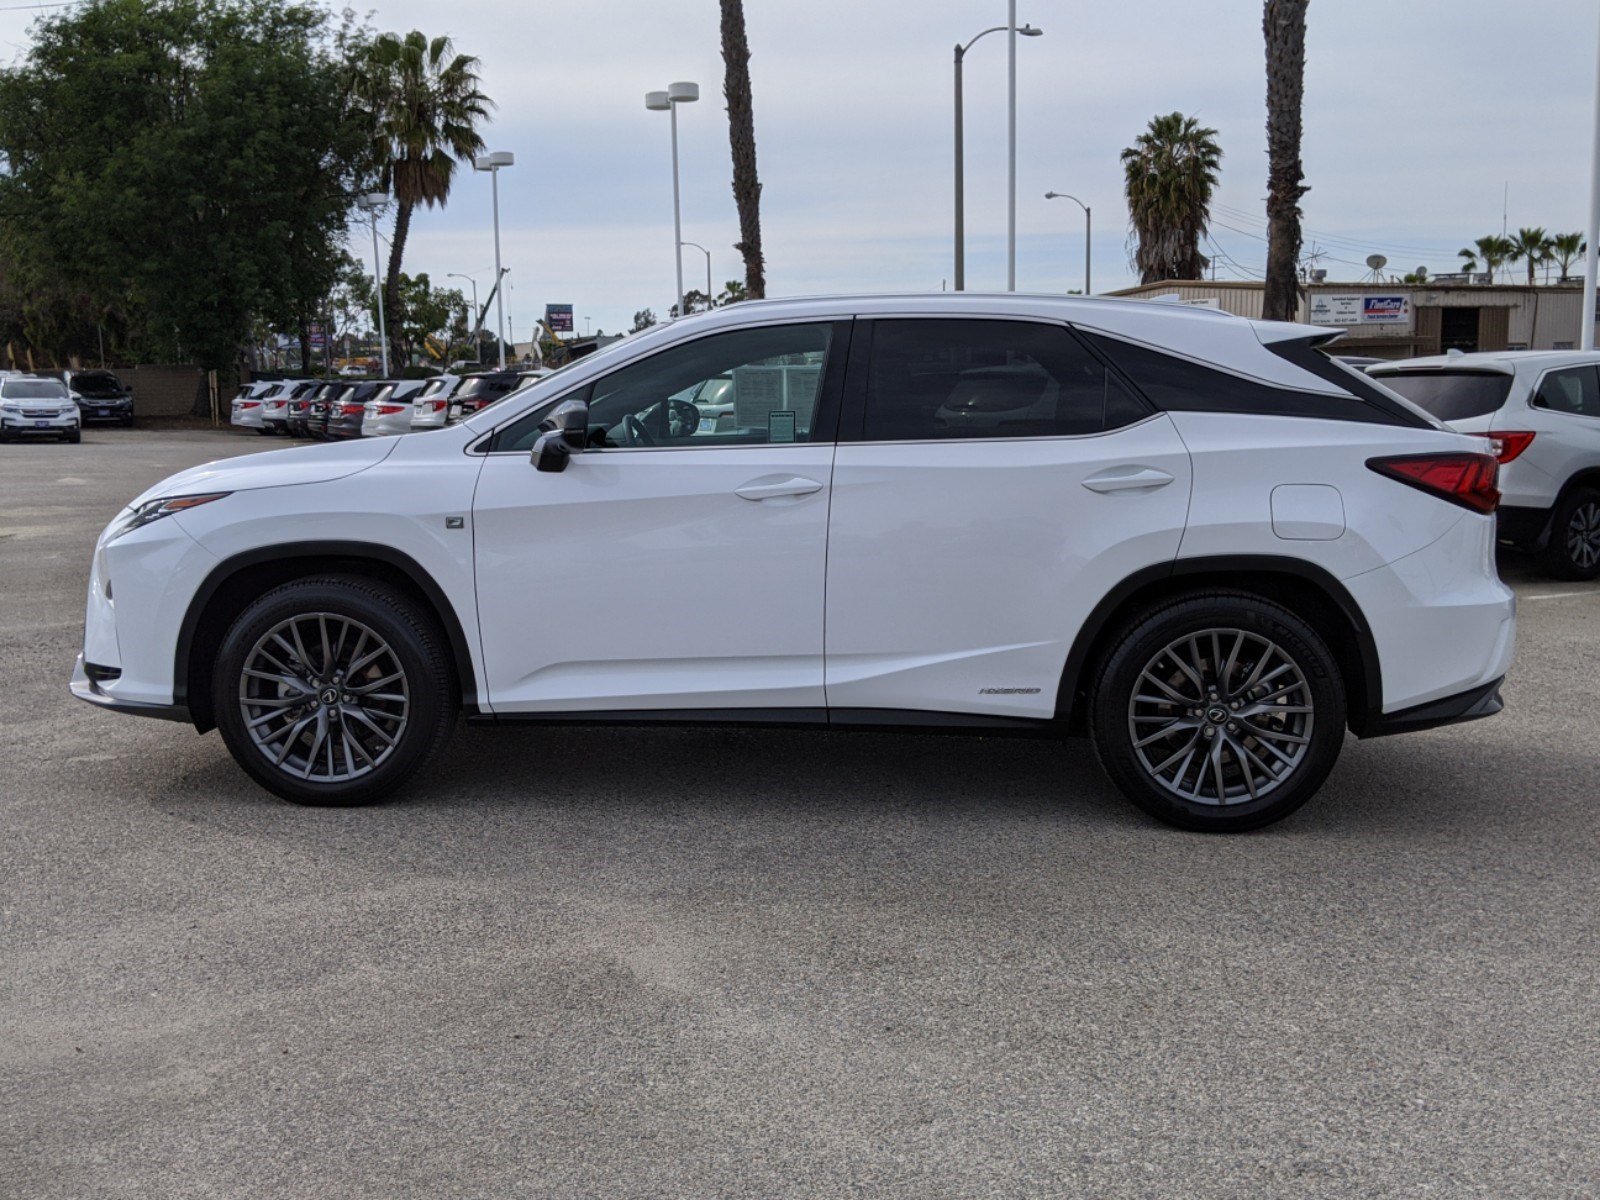 PreOwned 2017 Lexus RX 450h F Sport Sport Utility in